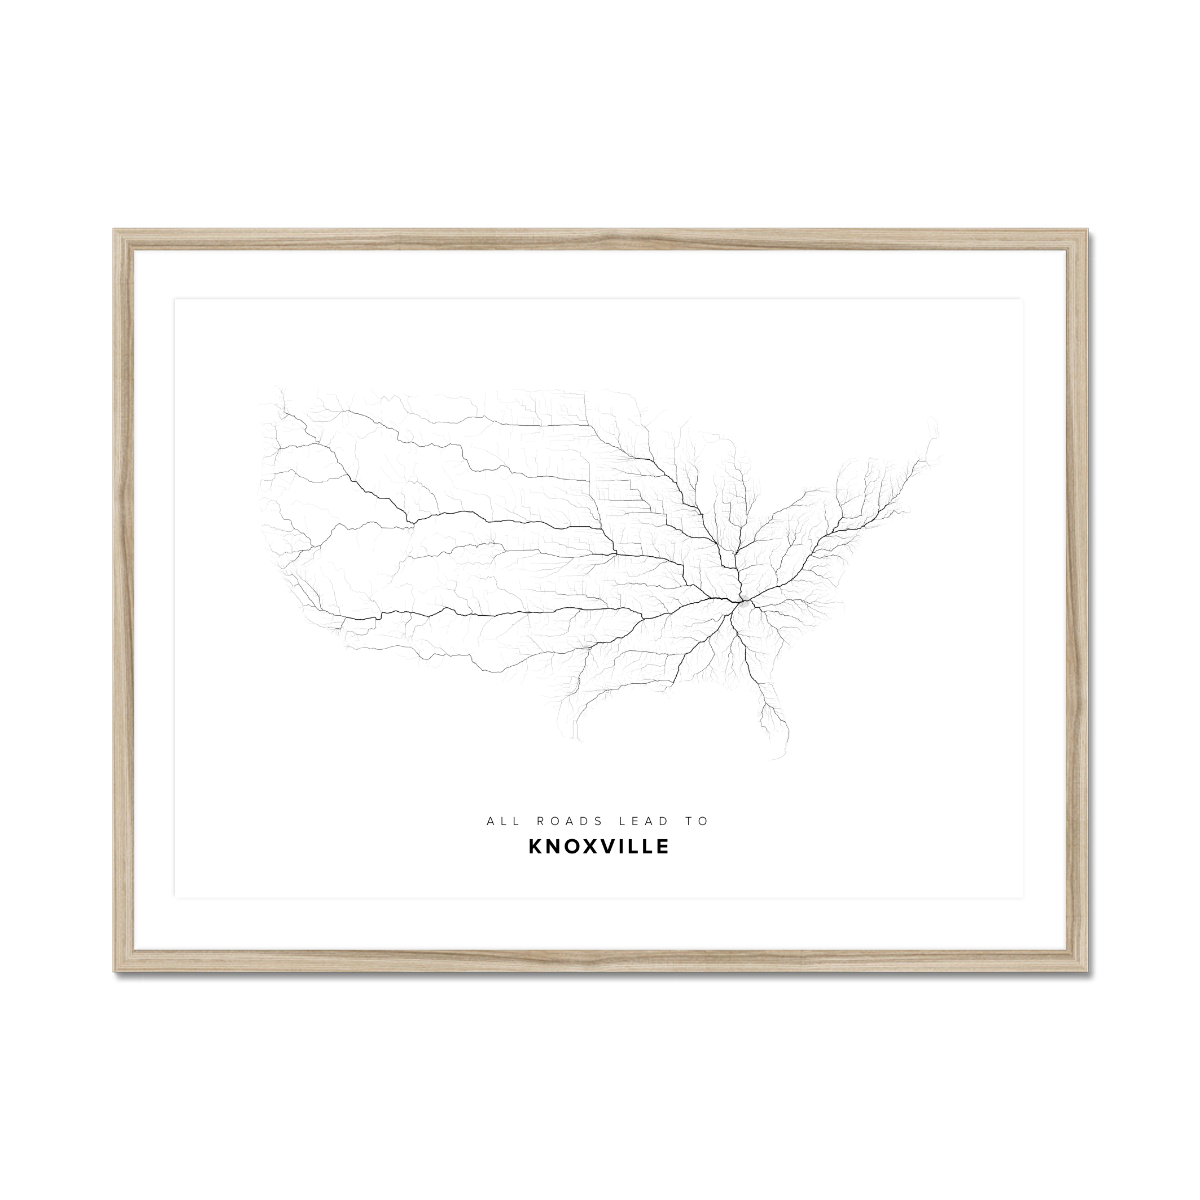 All roads lead to Knoxville (United States of America) Fine Art Map Print